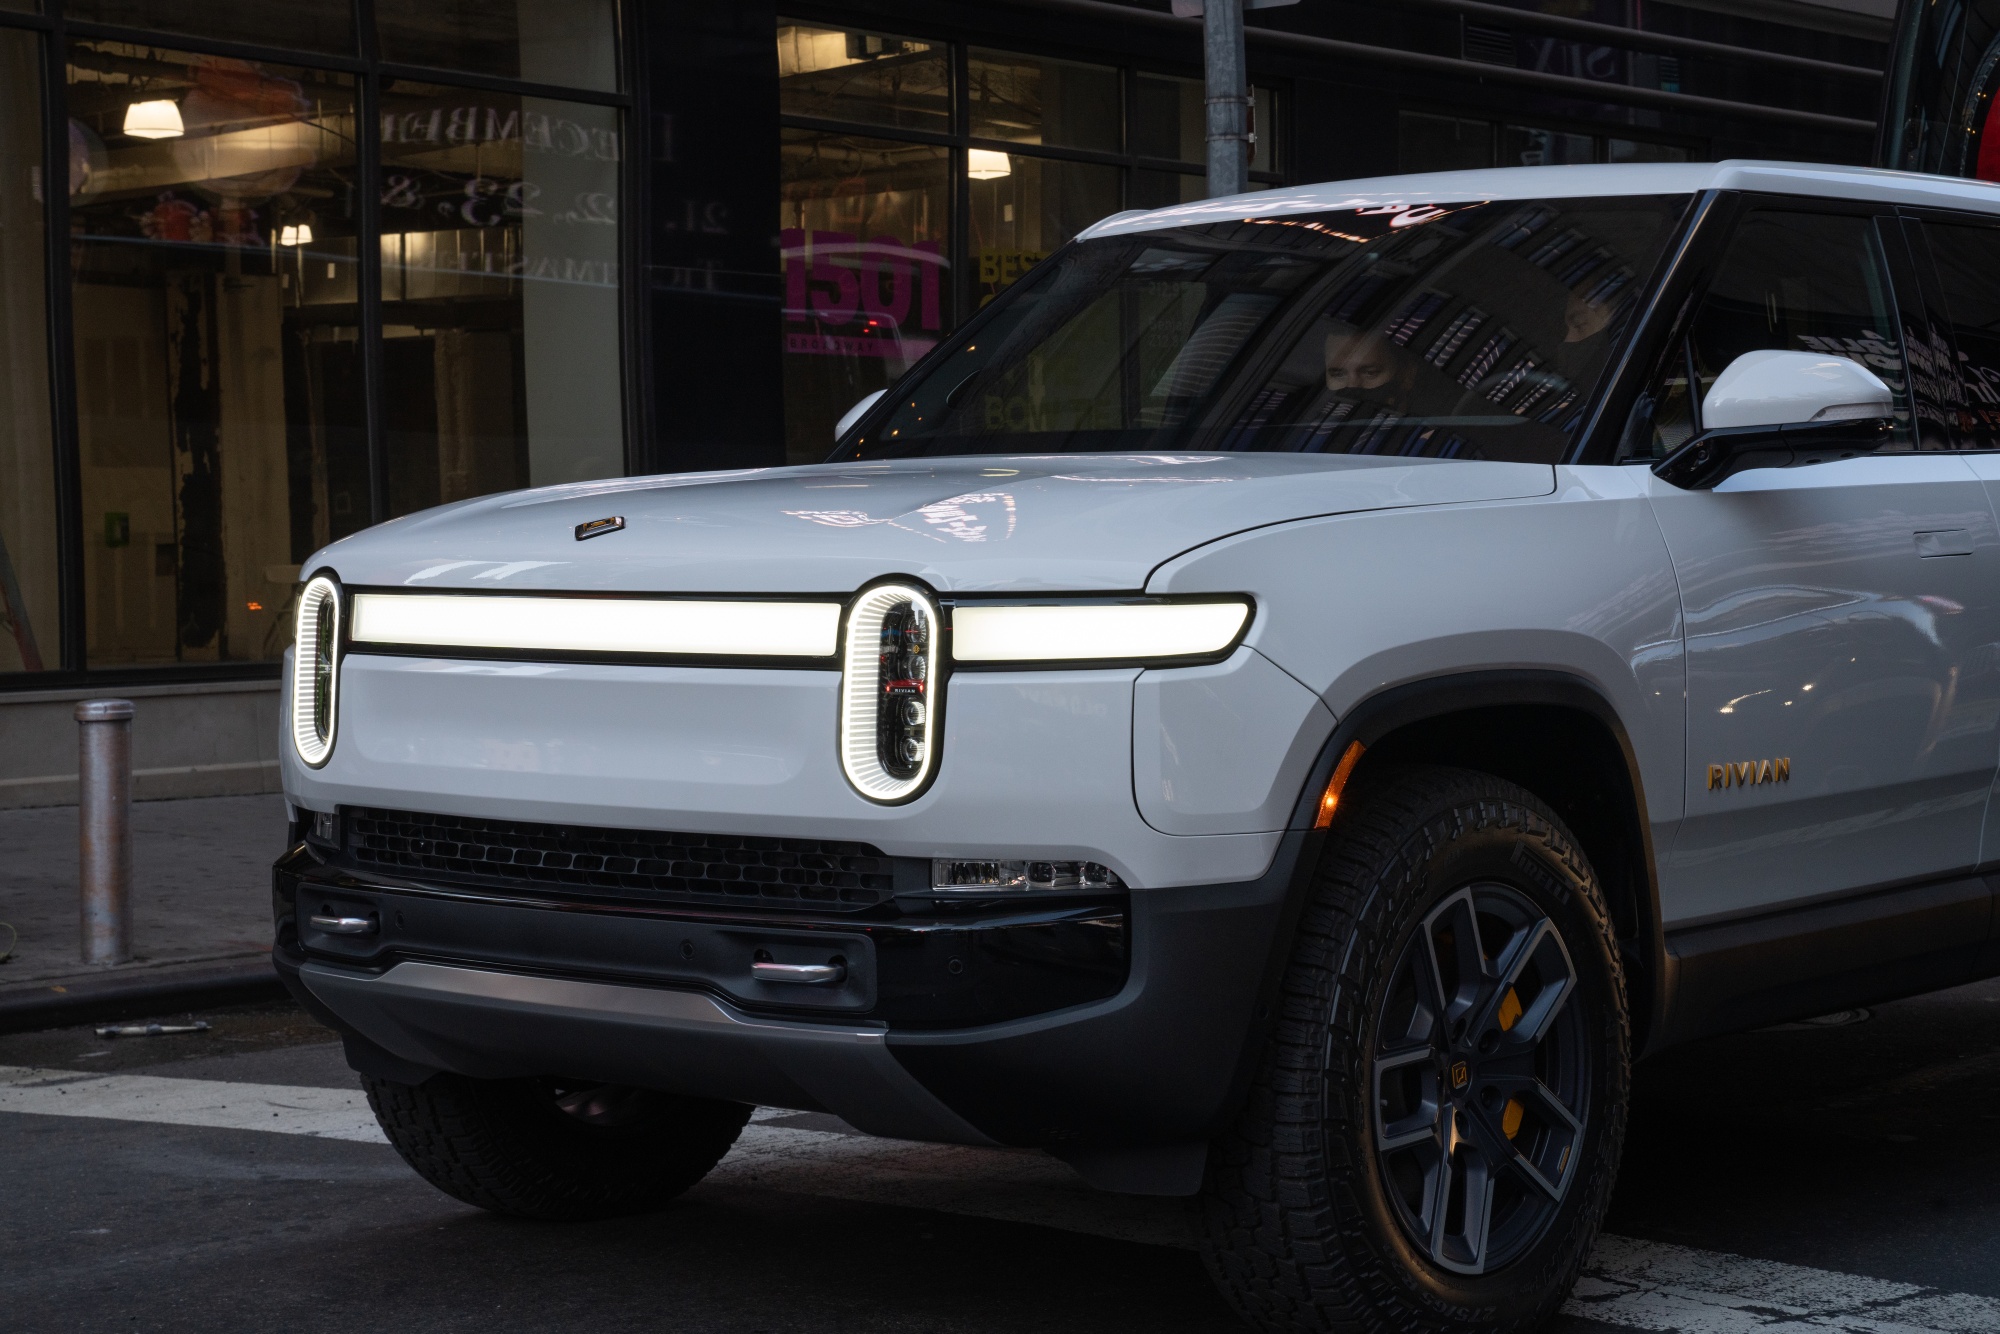 Making the Decision: Find the Best Vehicle to Replace Your Cancelled Rivian Order